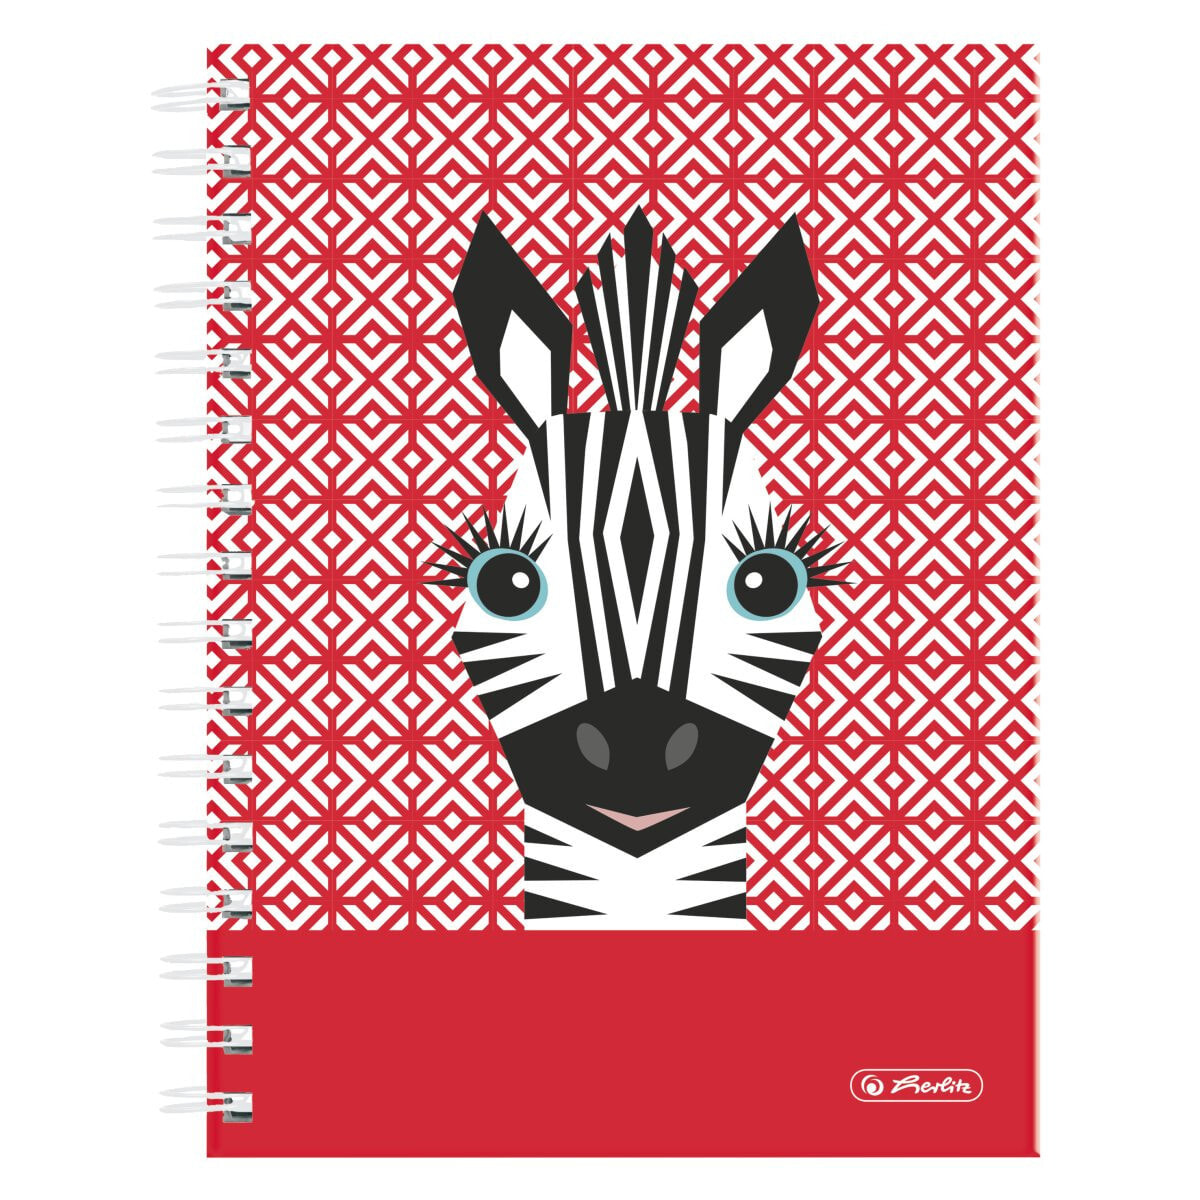 50039197 - Image - Black - Red - White - A5 - 100 sheets - 70 g/m² - Lined paper